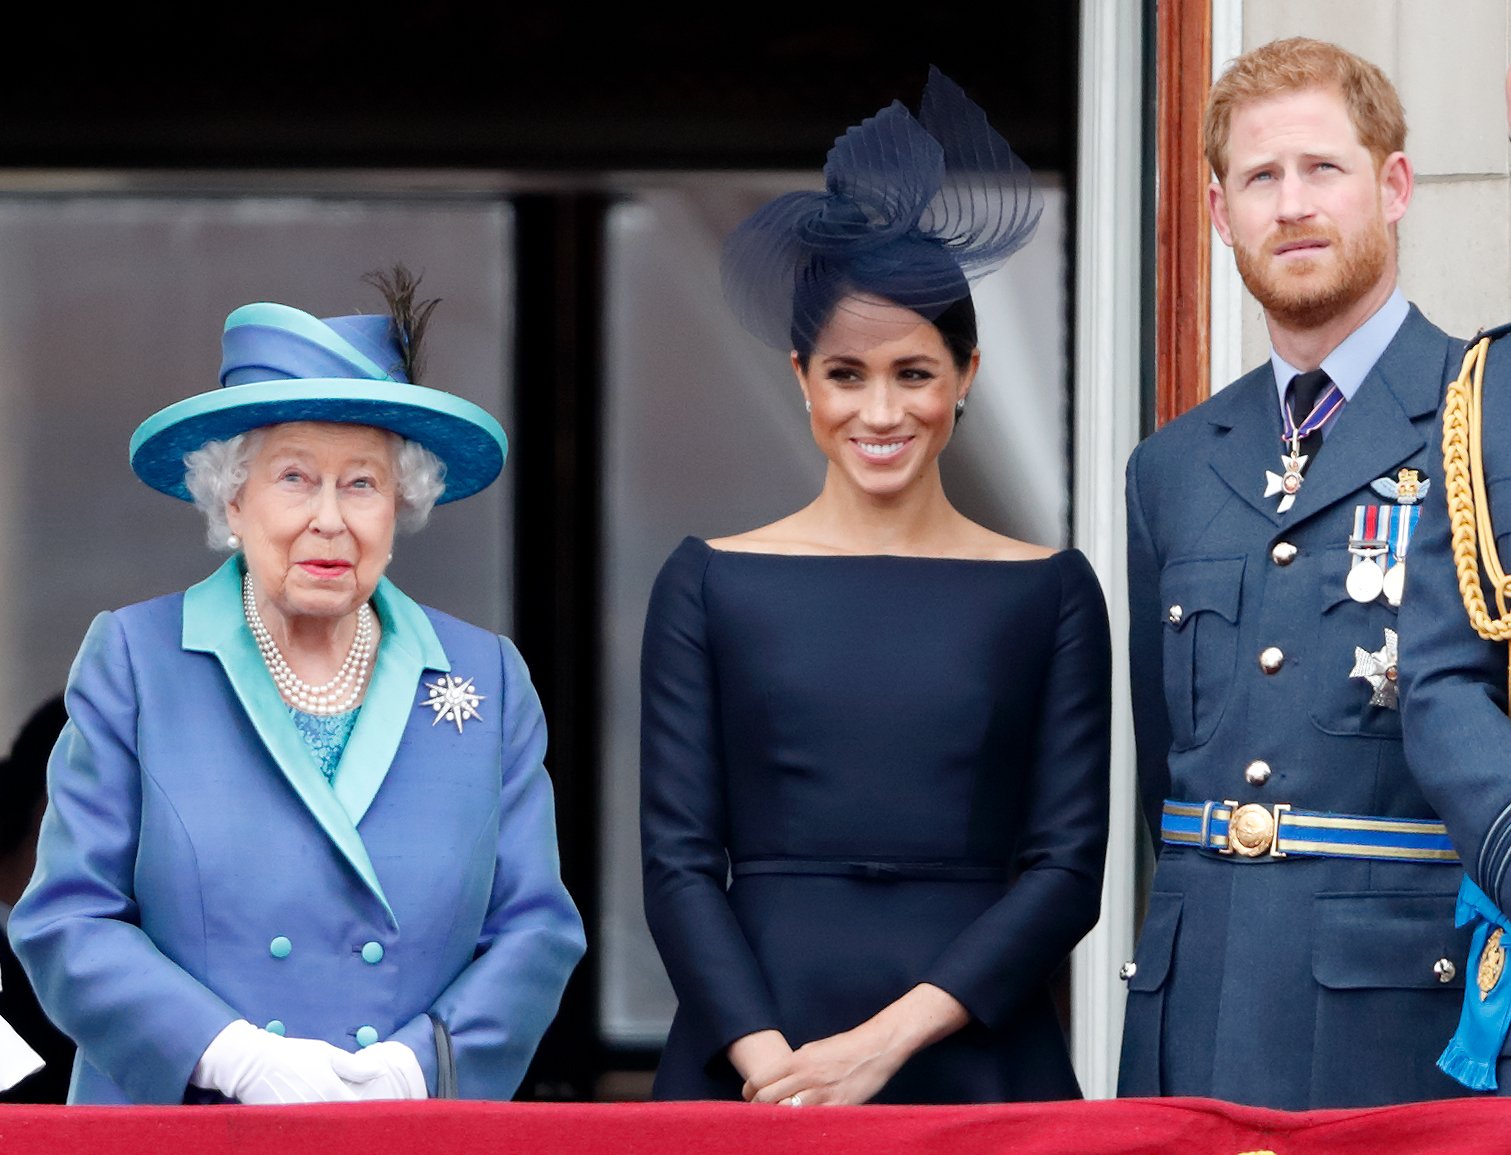 Queen Elizabeth II, Meghan, and Prince Harry watch a flypast to mark the Royal Air Force's centenary from Buckingham Palace's balcony on July 10, 2018, in London, England. | Source: Getty Images